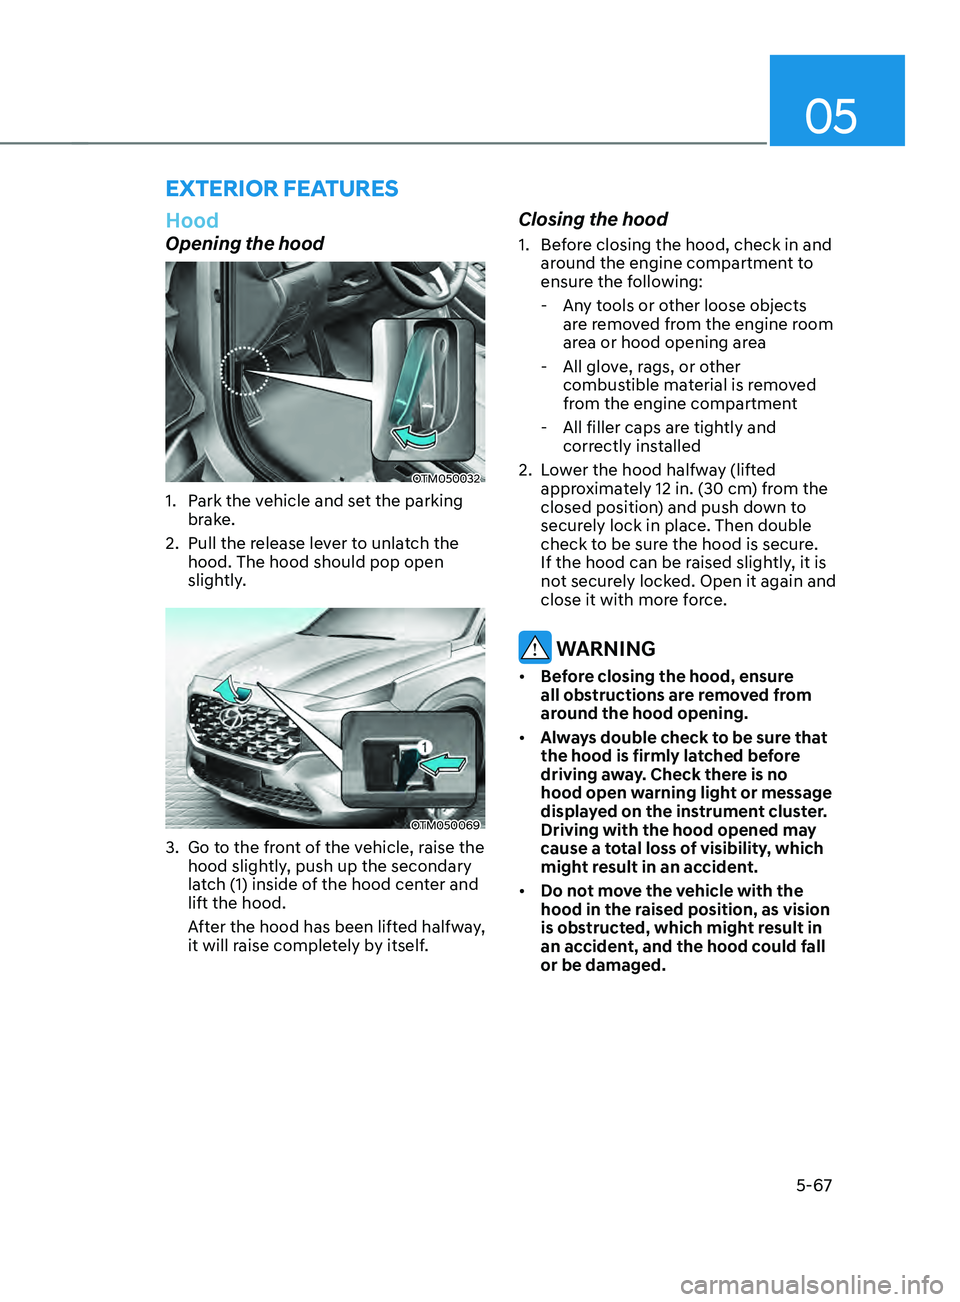 HYUNDAI SANTA FE LIMITED 2021  Owners Manual 05
5-67
Hood
Opening the hood
OTM050032 
1. Park the vehicle and set the parking 
brake.
2.
 Pull the release le

ver to unlatch the 
hood. The hood should pop open 
slightly.
OTM050069
3. Go to the f